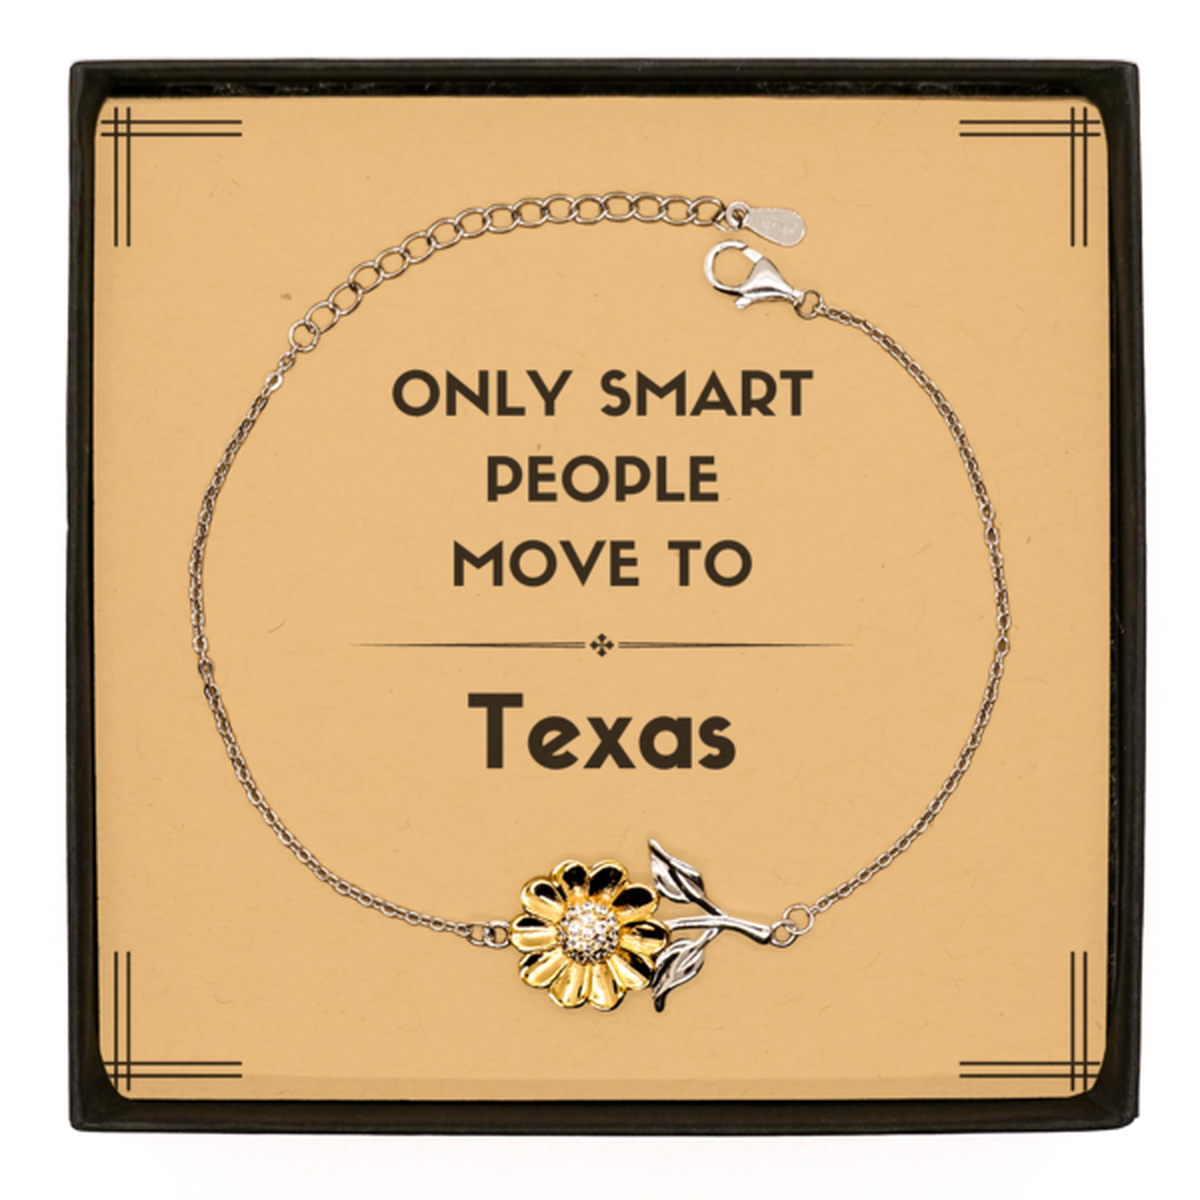 Only smart people move to Texas Sunflower Bracelet, Message Card Gifts For Texas, Move to Texas Gifts for Friends Coworker Funny Saying Quote